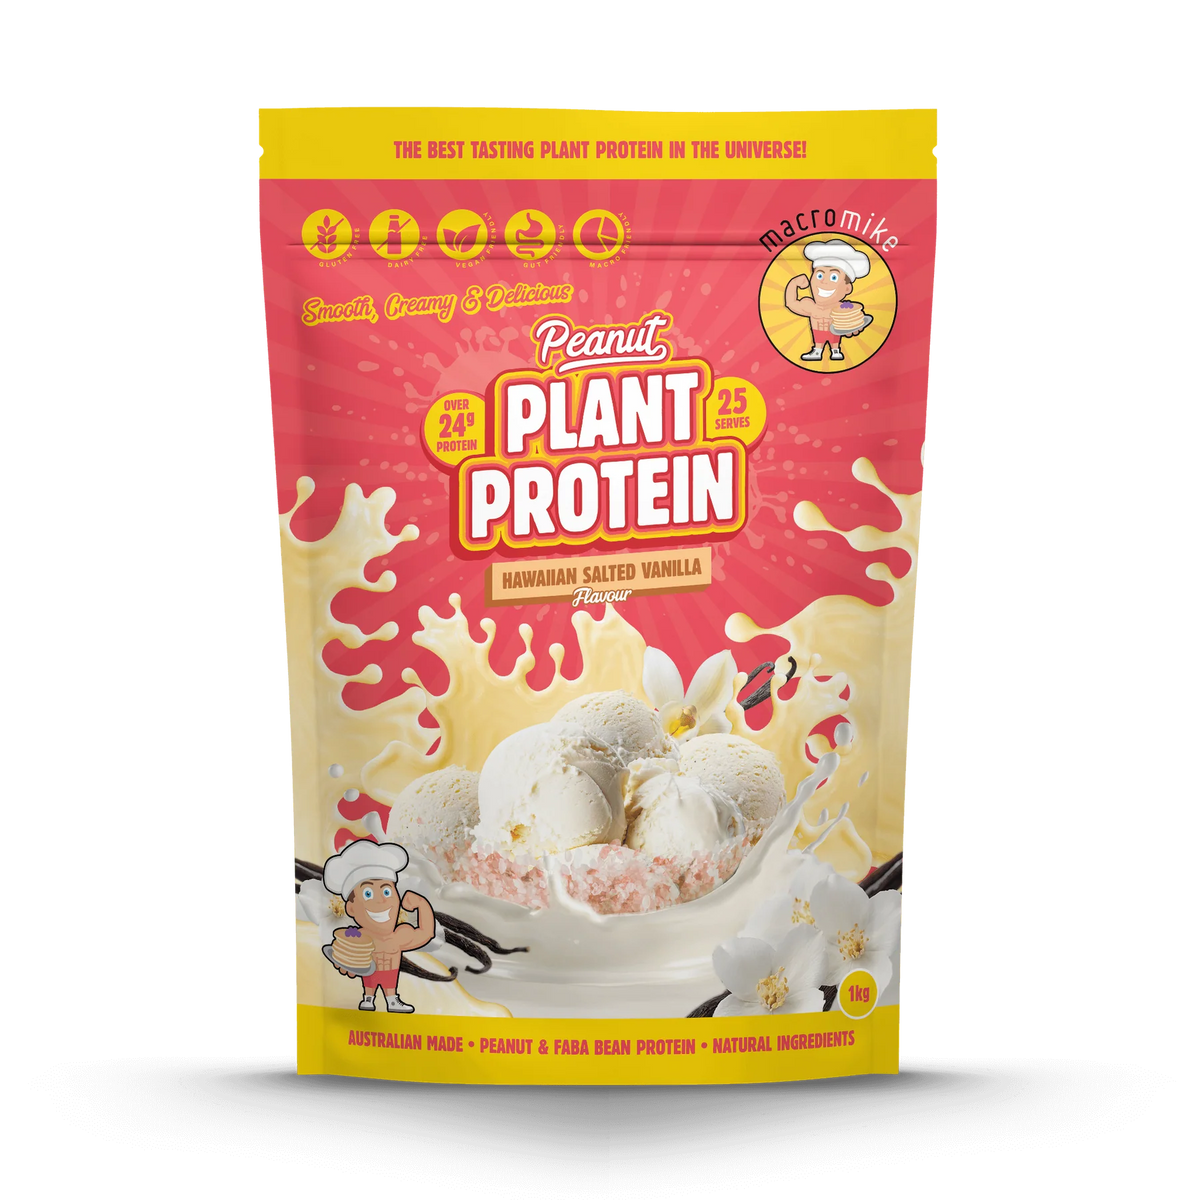 PEANUT PLANT PROTTEIN BY MACRO MIKE (VEGAN PROTEIN)